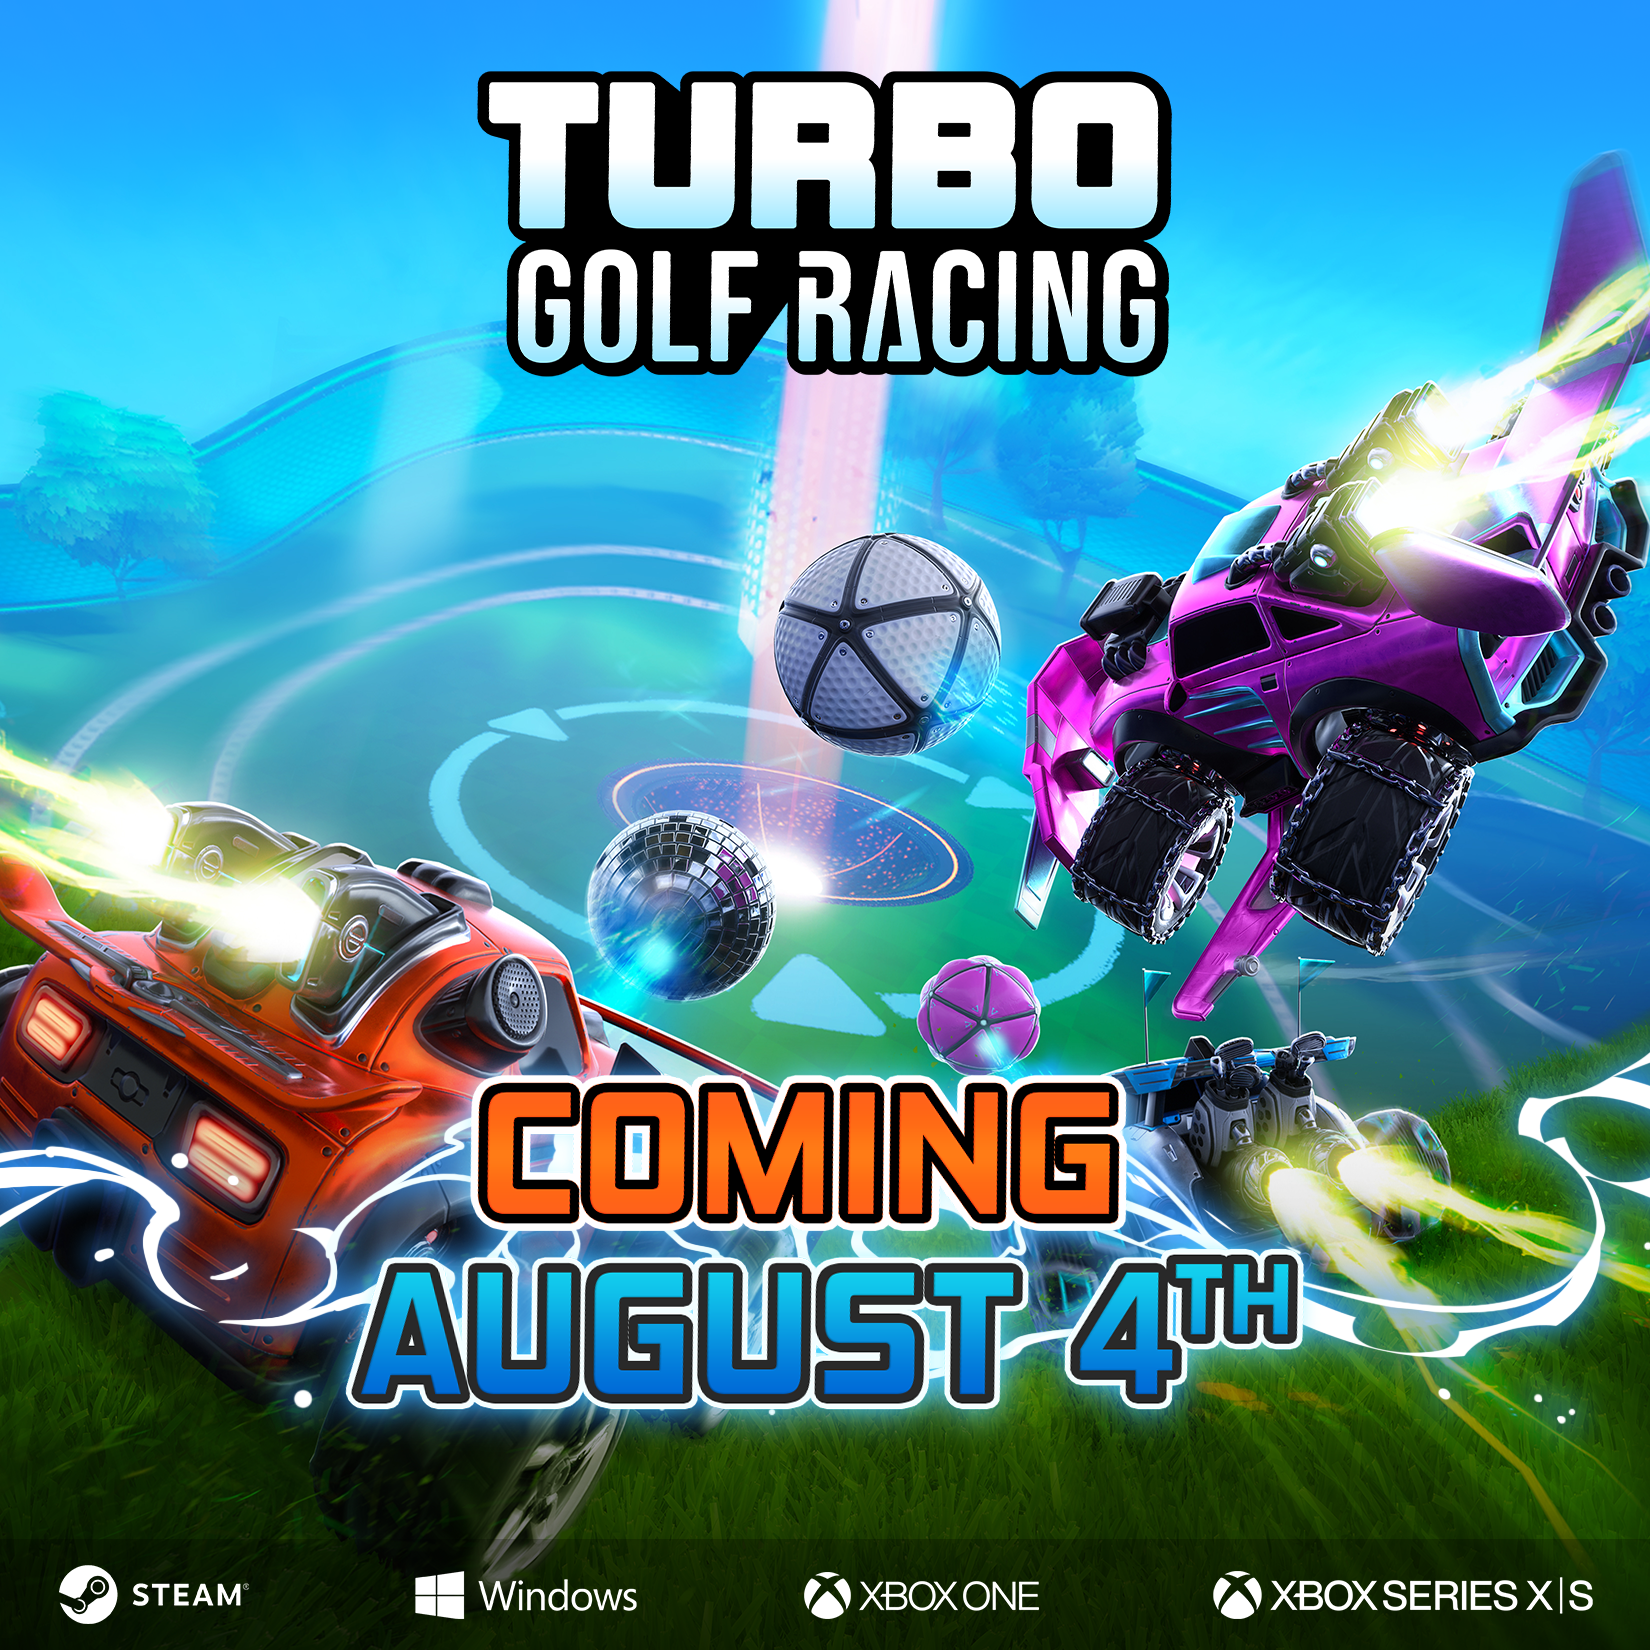 Turbo Golf Racing key art - Game Coming August 4th to Steam, Windows, Xbox Series X|S and Xbox One